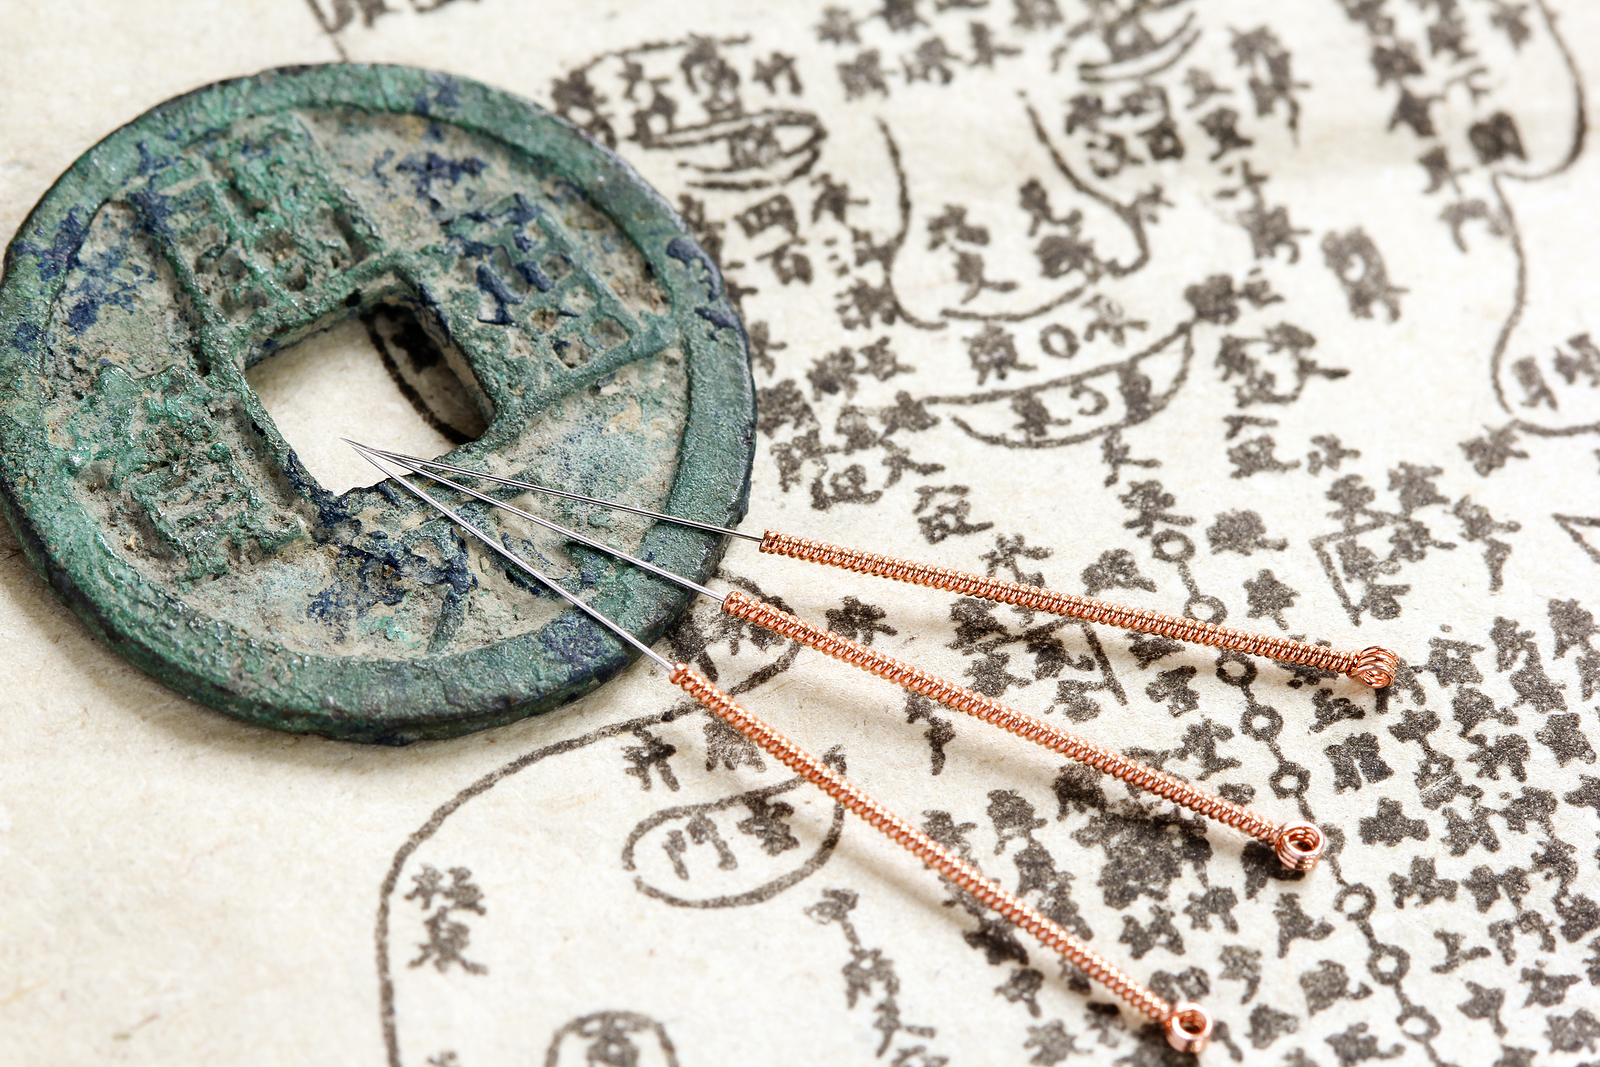 The Efficacy of Acupuncture and Functional Medicine